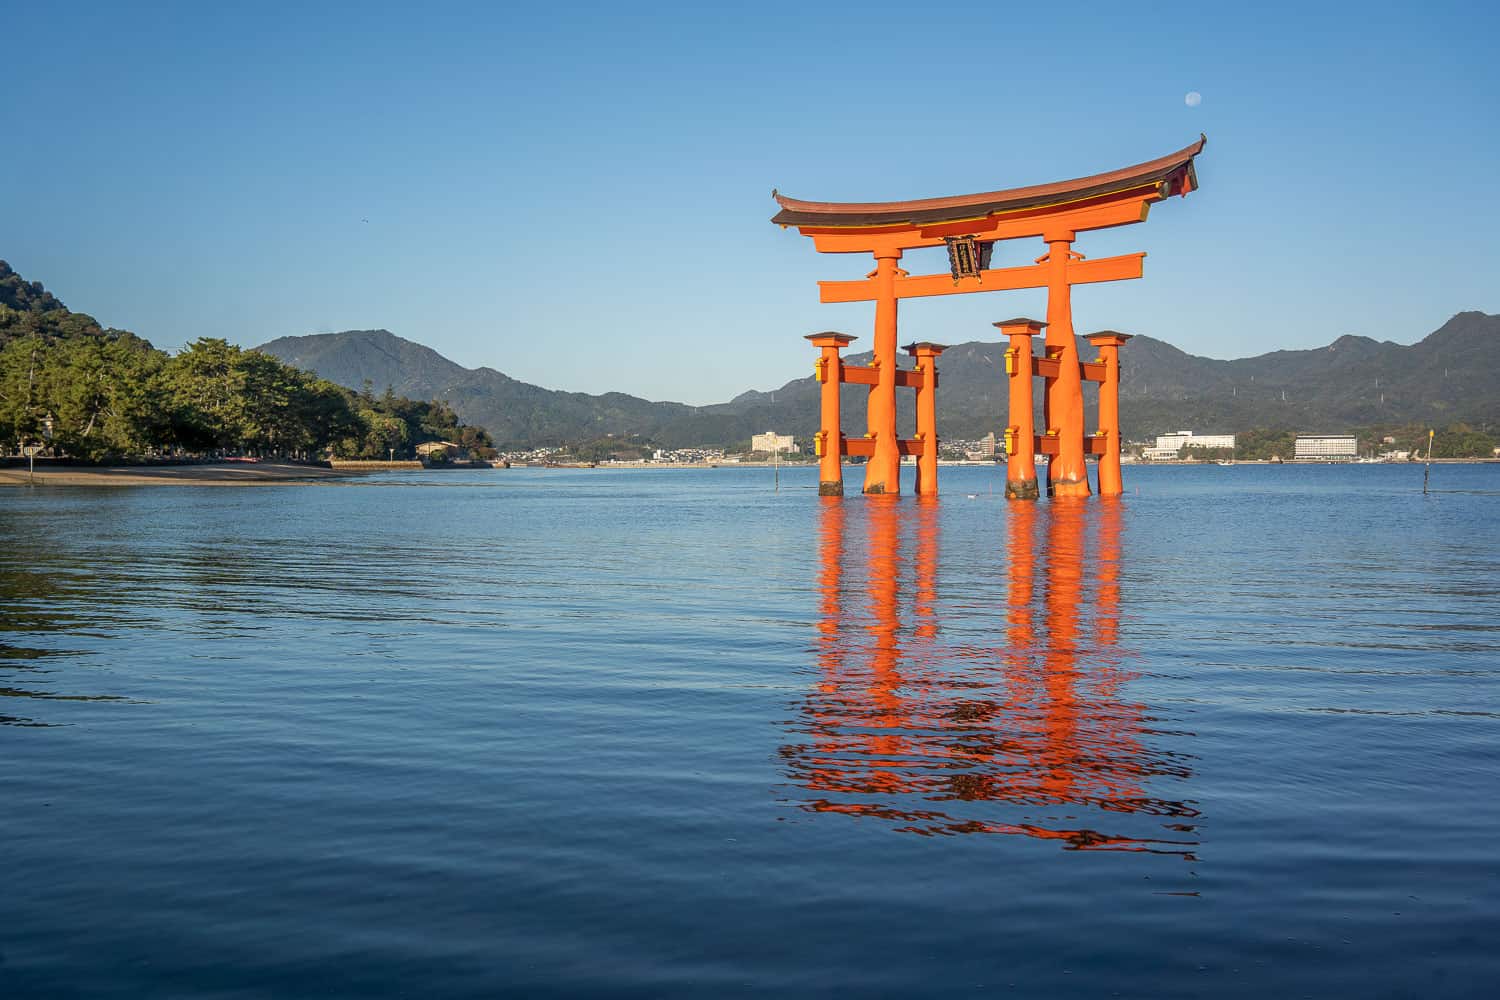 Giant torii gate at high tide on Miyajima Island, Japan with reflection in water